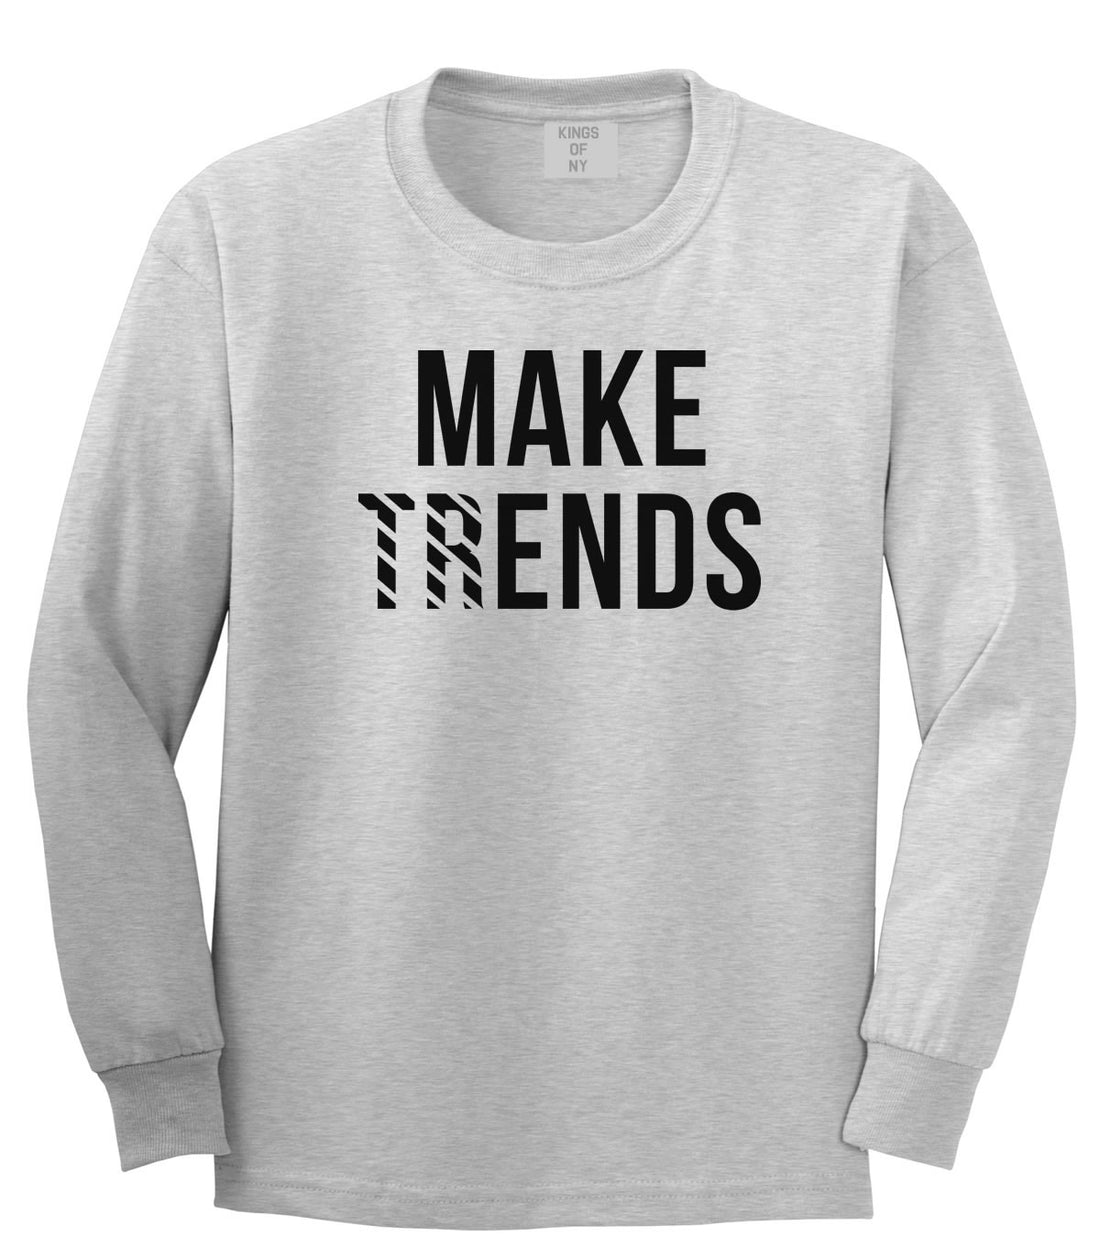 Make Trends Make Ends Boys Kids Long Sleeve T-Shirt in Grey by Kings Of NY